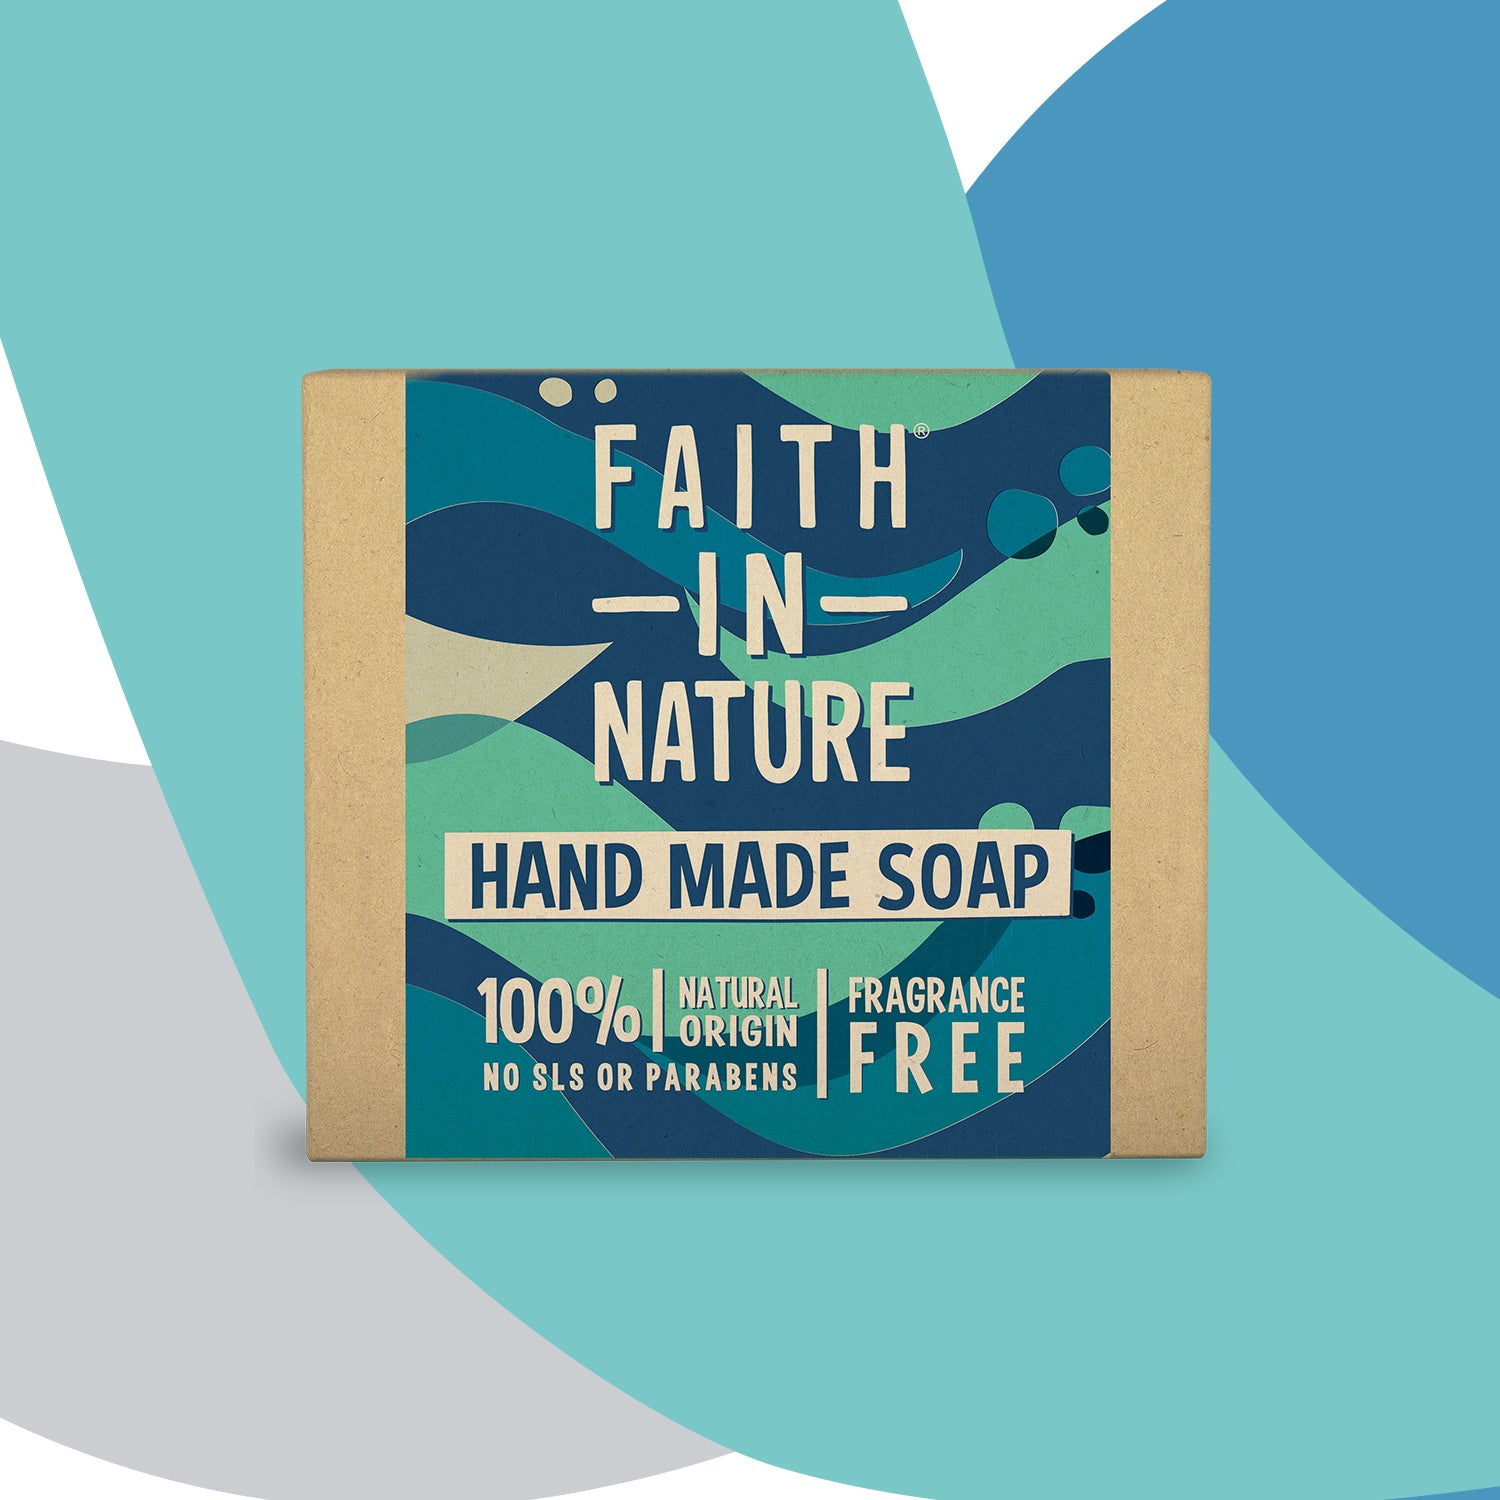 Faith in Nature Boxed Soap 100g - Fragrance Free